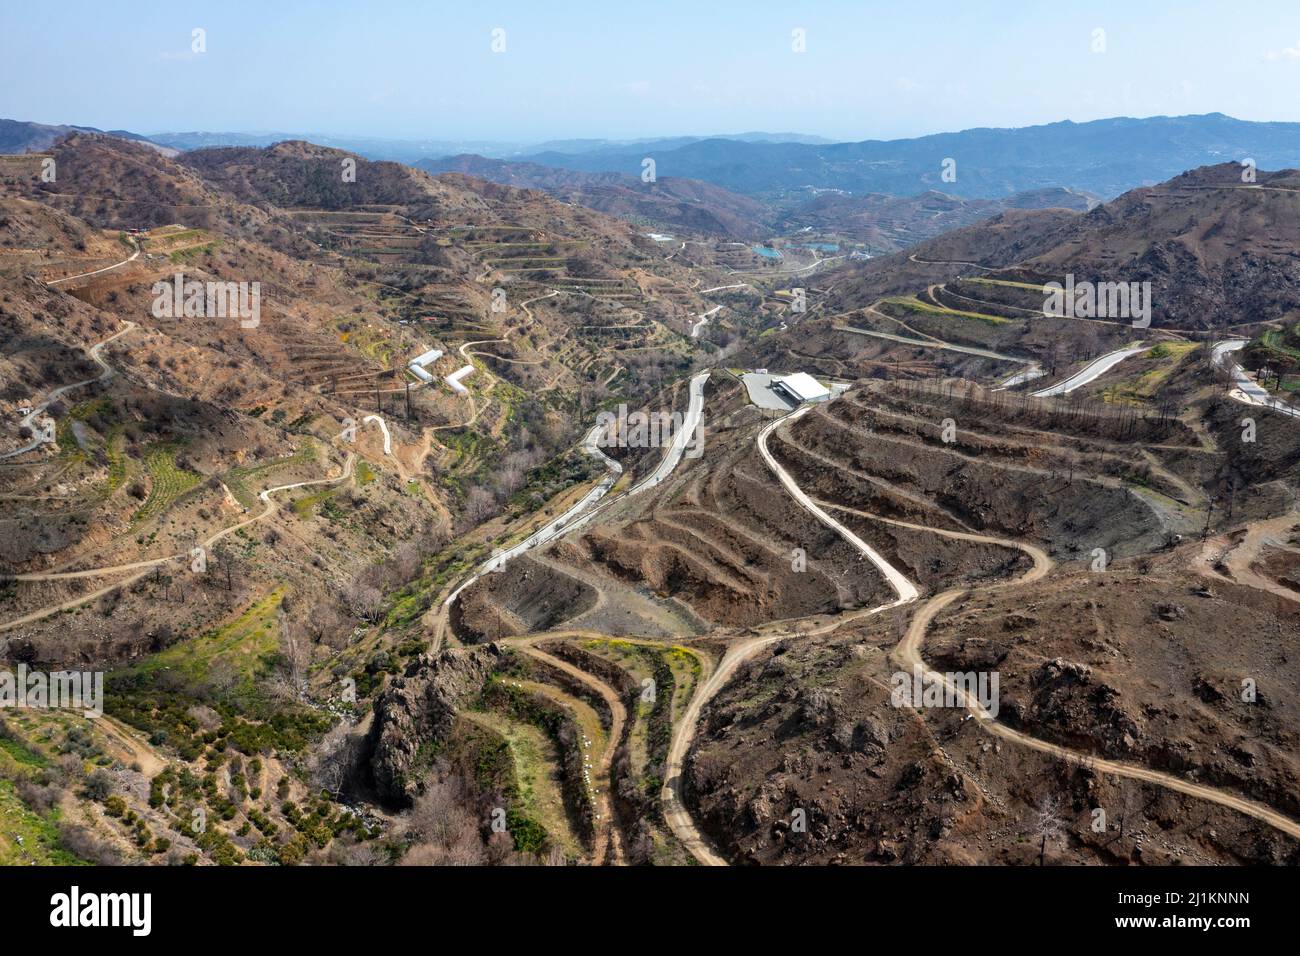 Aerial view of the scarred landscape which was badly damaged by a forest fire in 2021, Odou village,  Larnaca district, Cyprus. Stock Photo